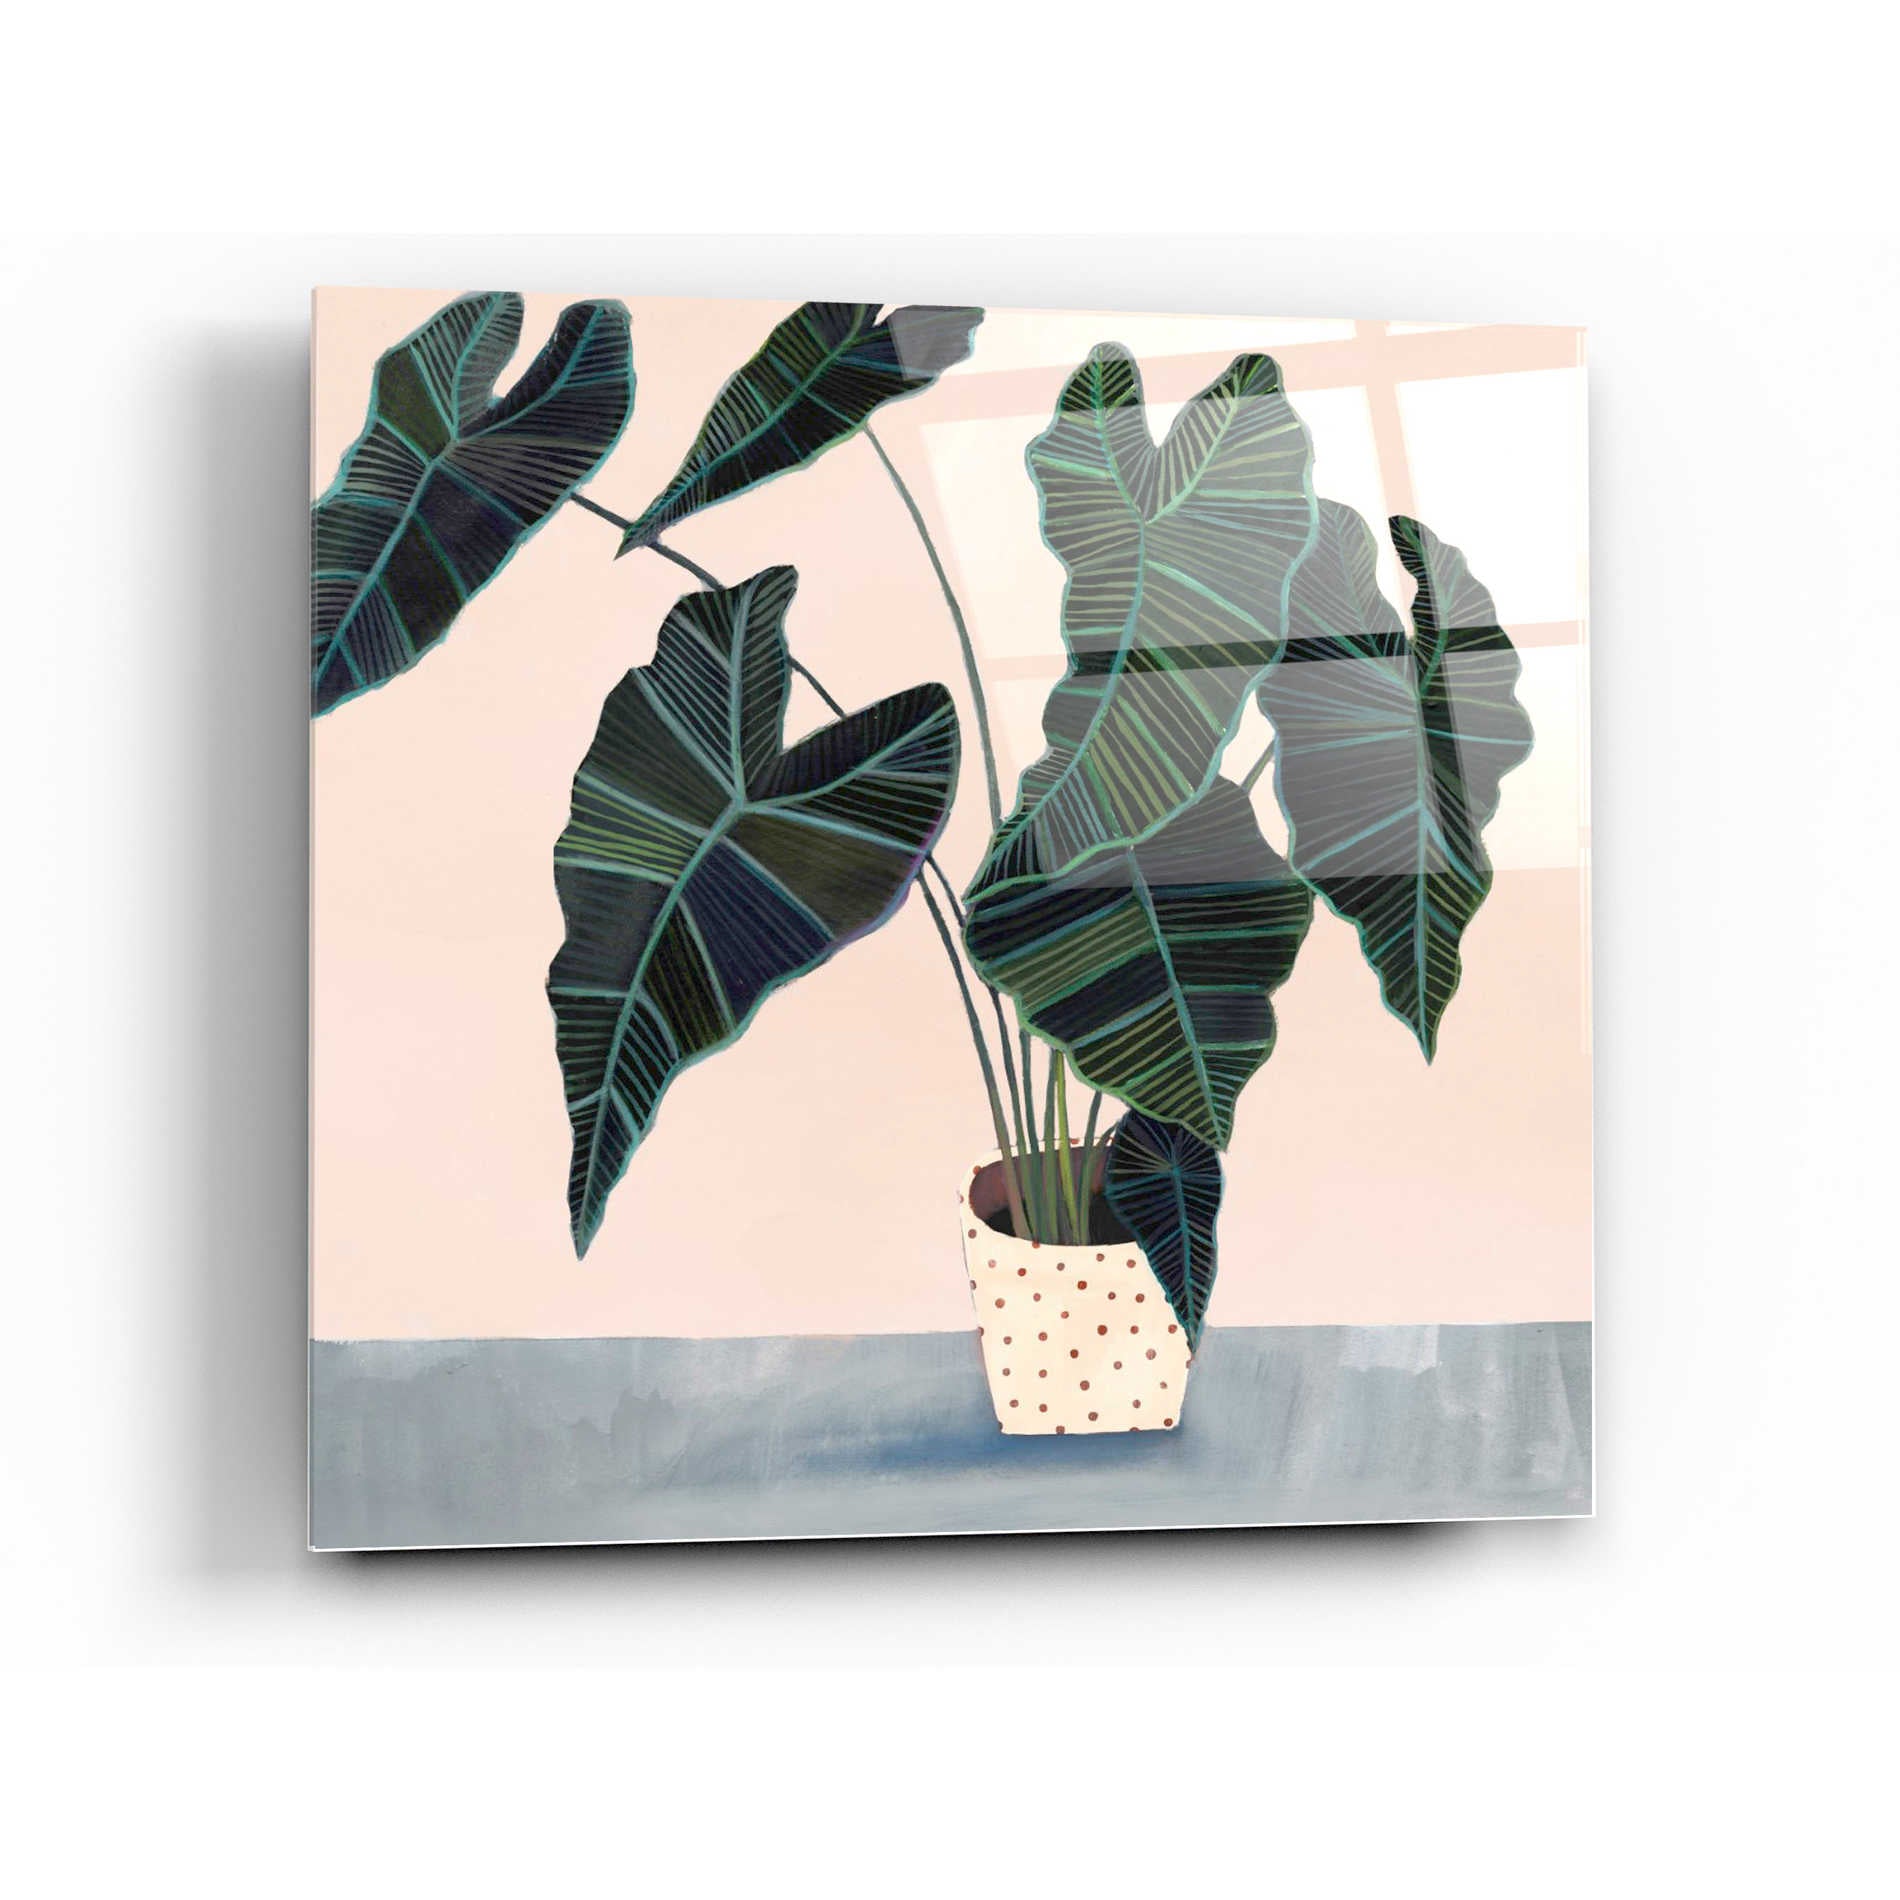 Epic Art 'Houseplant II' by Victoria Borges Acrylic Glass Wall Art,36x36